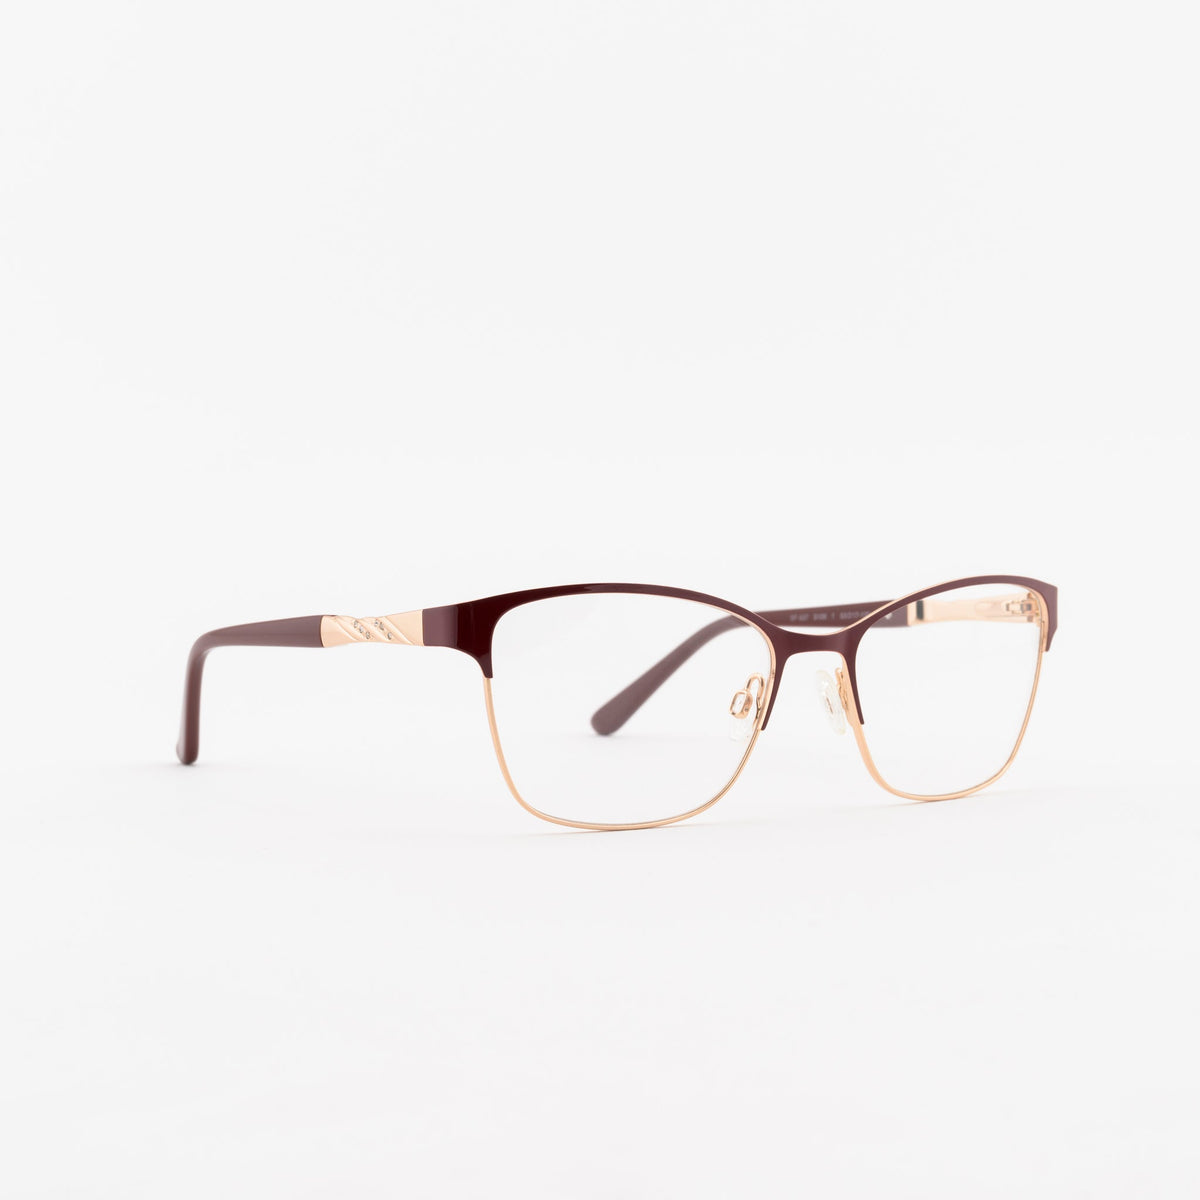 SF-537 Frames Superflex 53 S106 - BURGUNDY ROSE GOLD Not Available